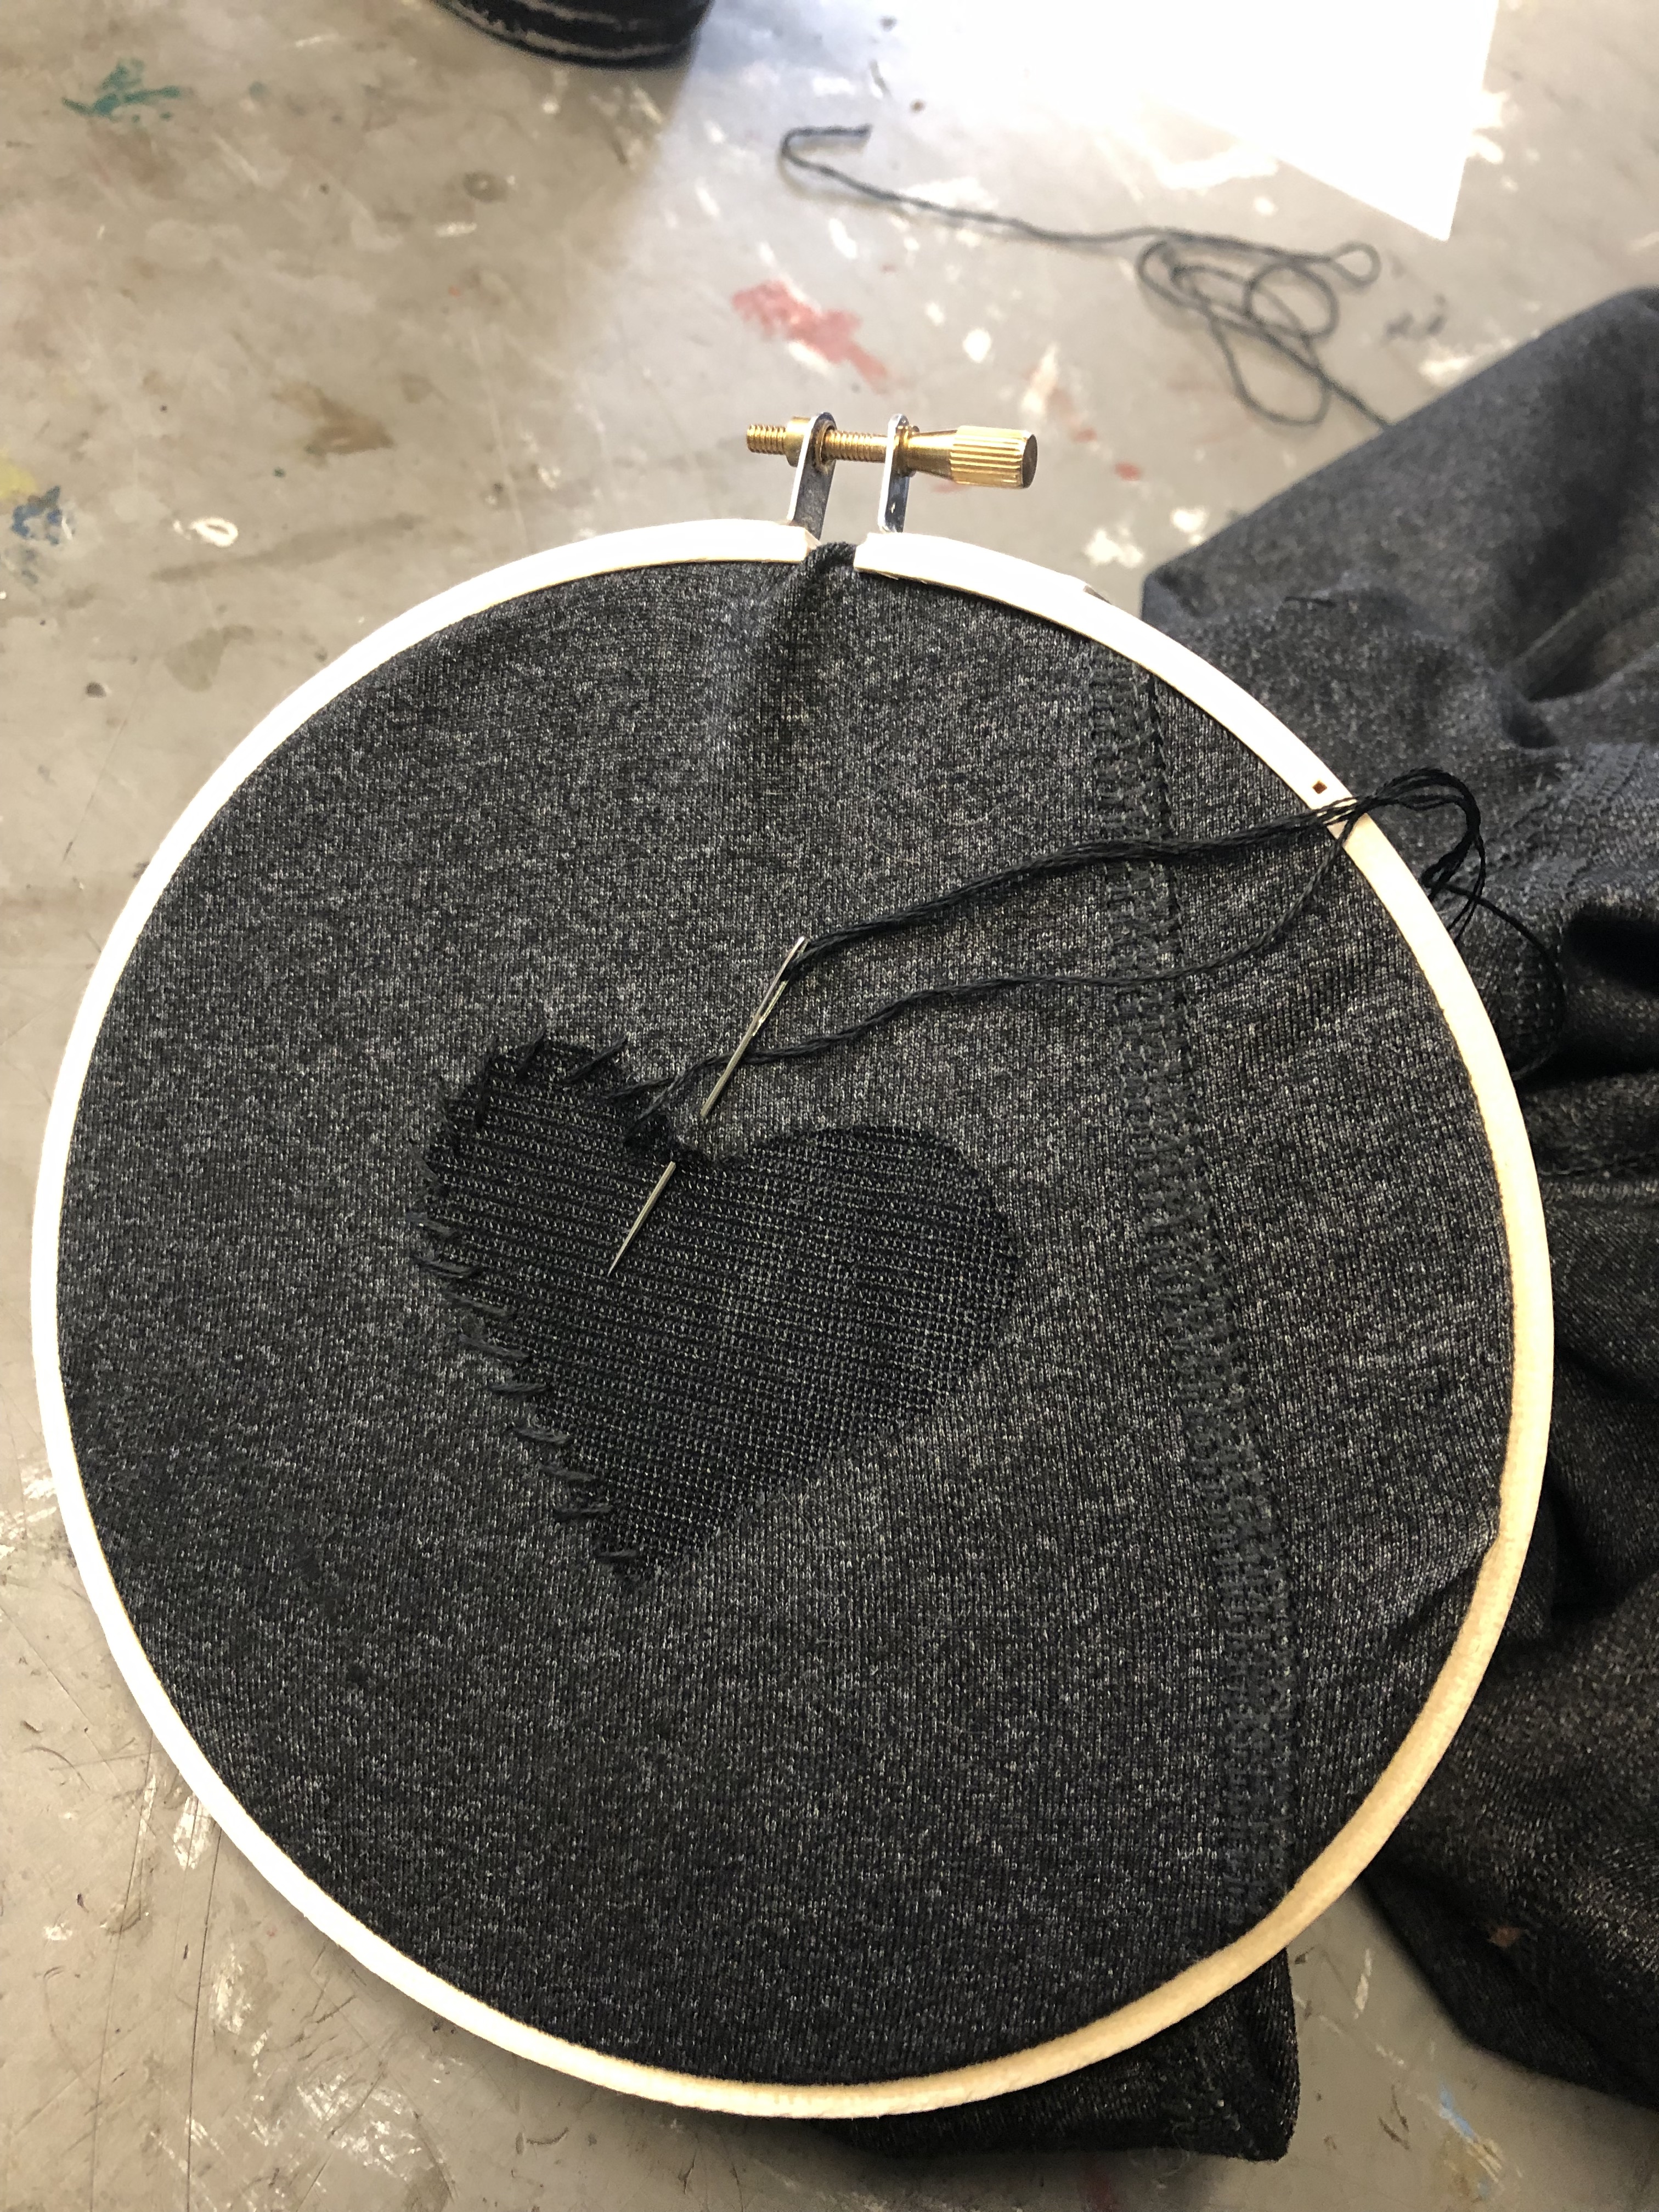 an embroidery hoop with a piece of gray fabric and a patch in the shape of a heart partially sewn on